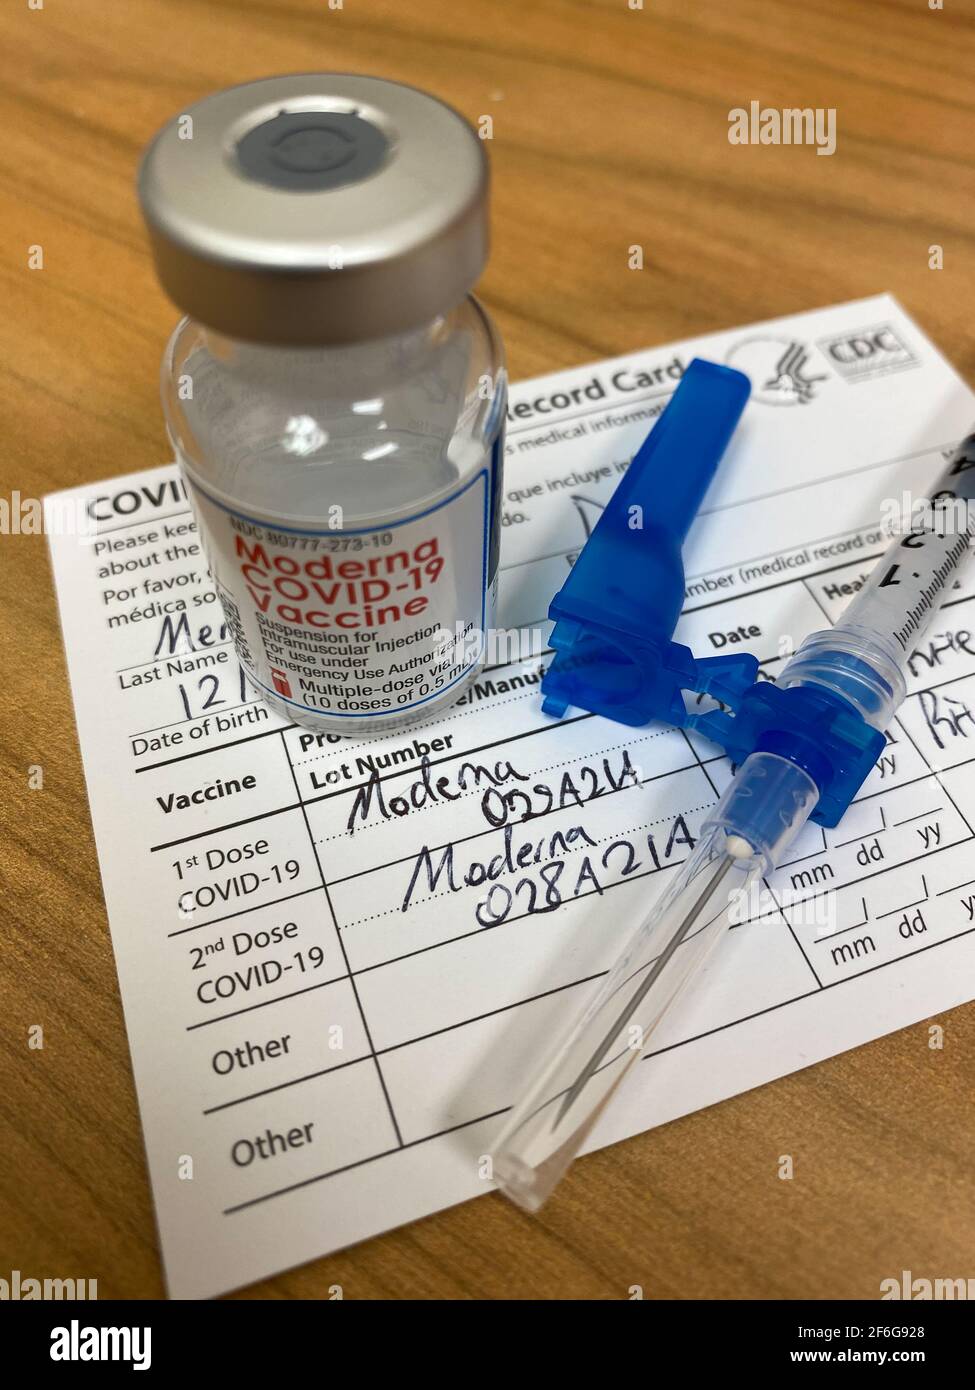 A Moderna COVID-19 vial / 10 dose bottle, needle, and CDC record card with 2nd vaccine dosage indicated. The CDC announced that the Moderna and Pfizer vaccines also prevent asymptomatic infection of the coronavirus. CDC vaccination card can potentially be used as a COVID-19 passport. Stock Photo